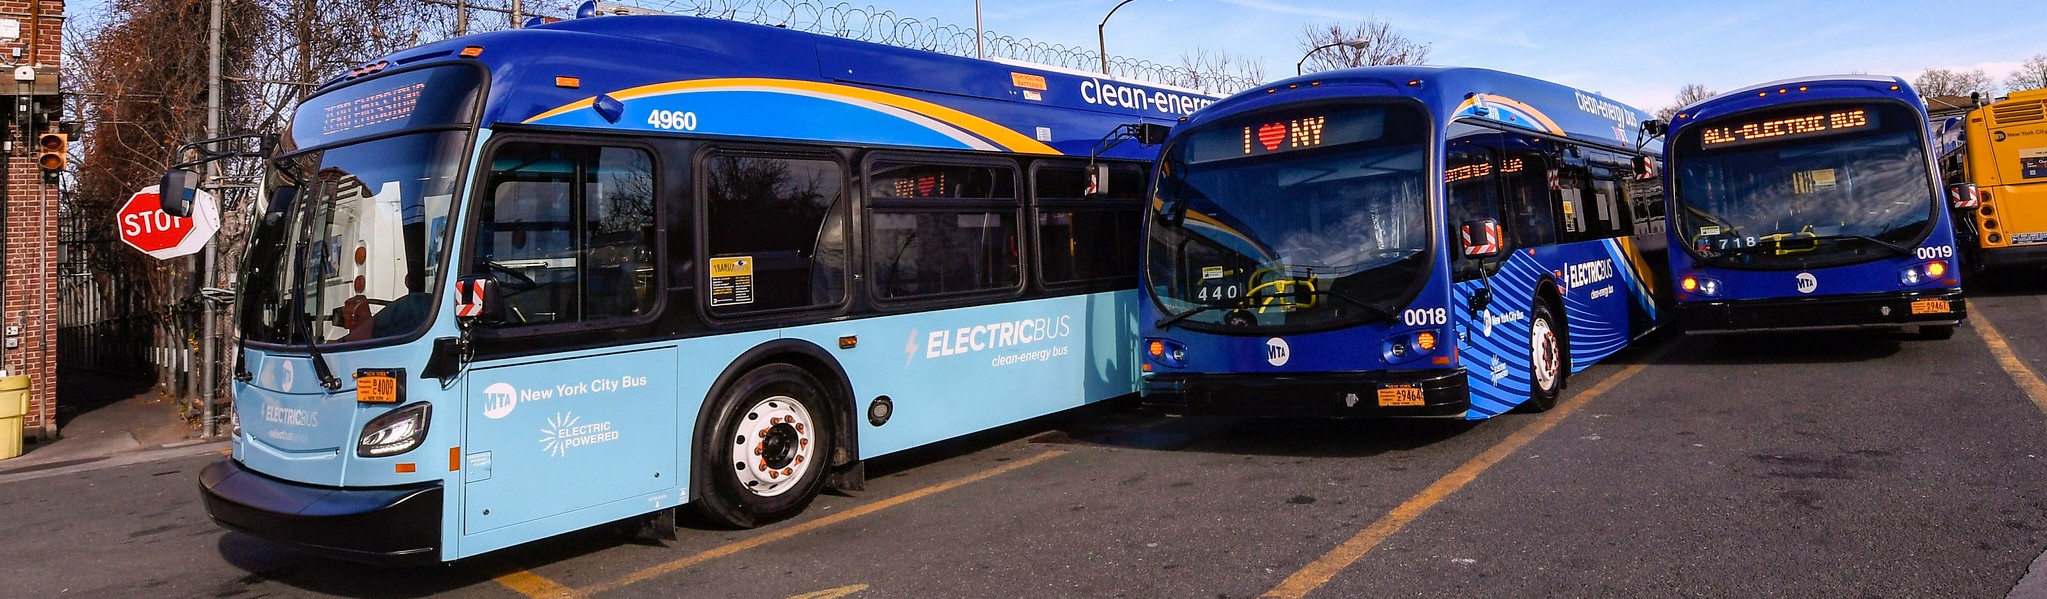 Three electric buses parked in a parking lot. The buses are blue. 